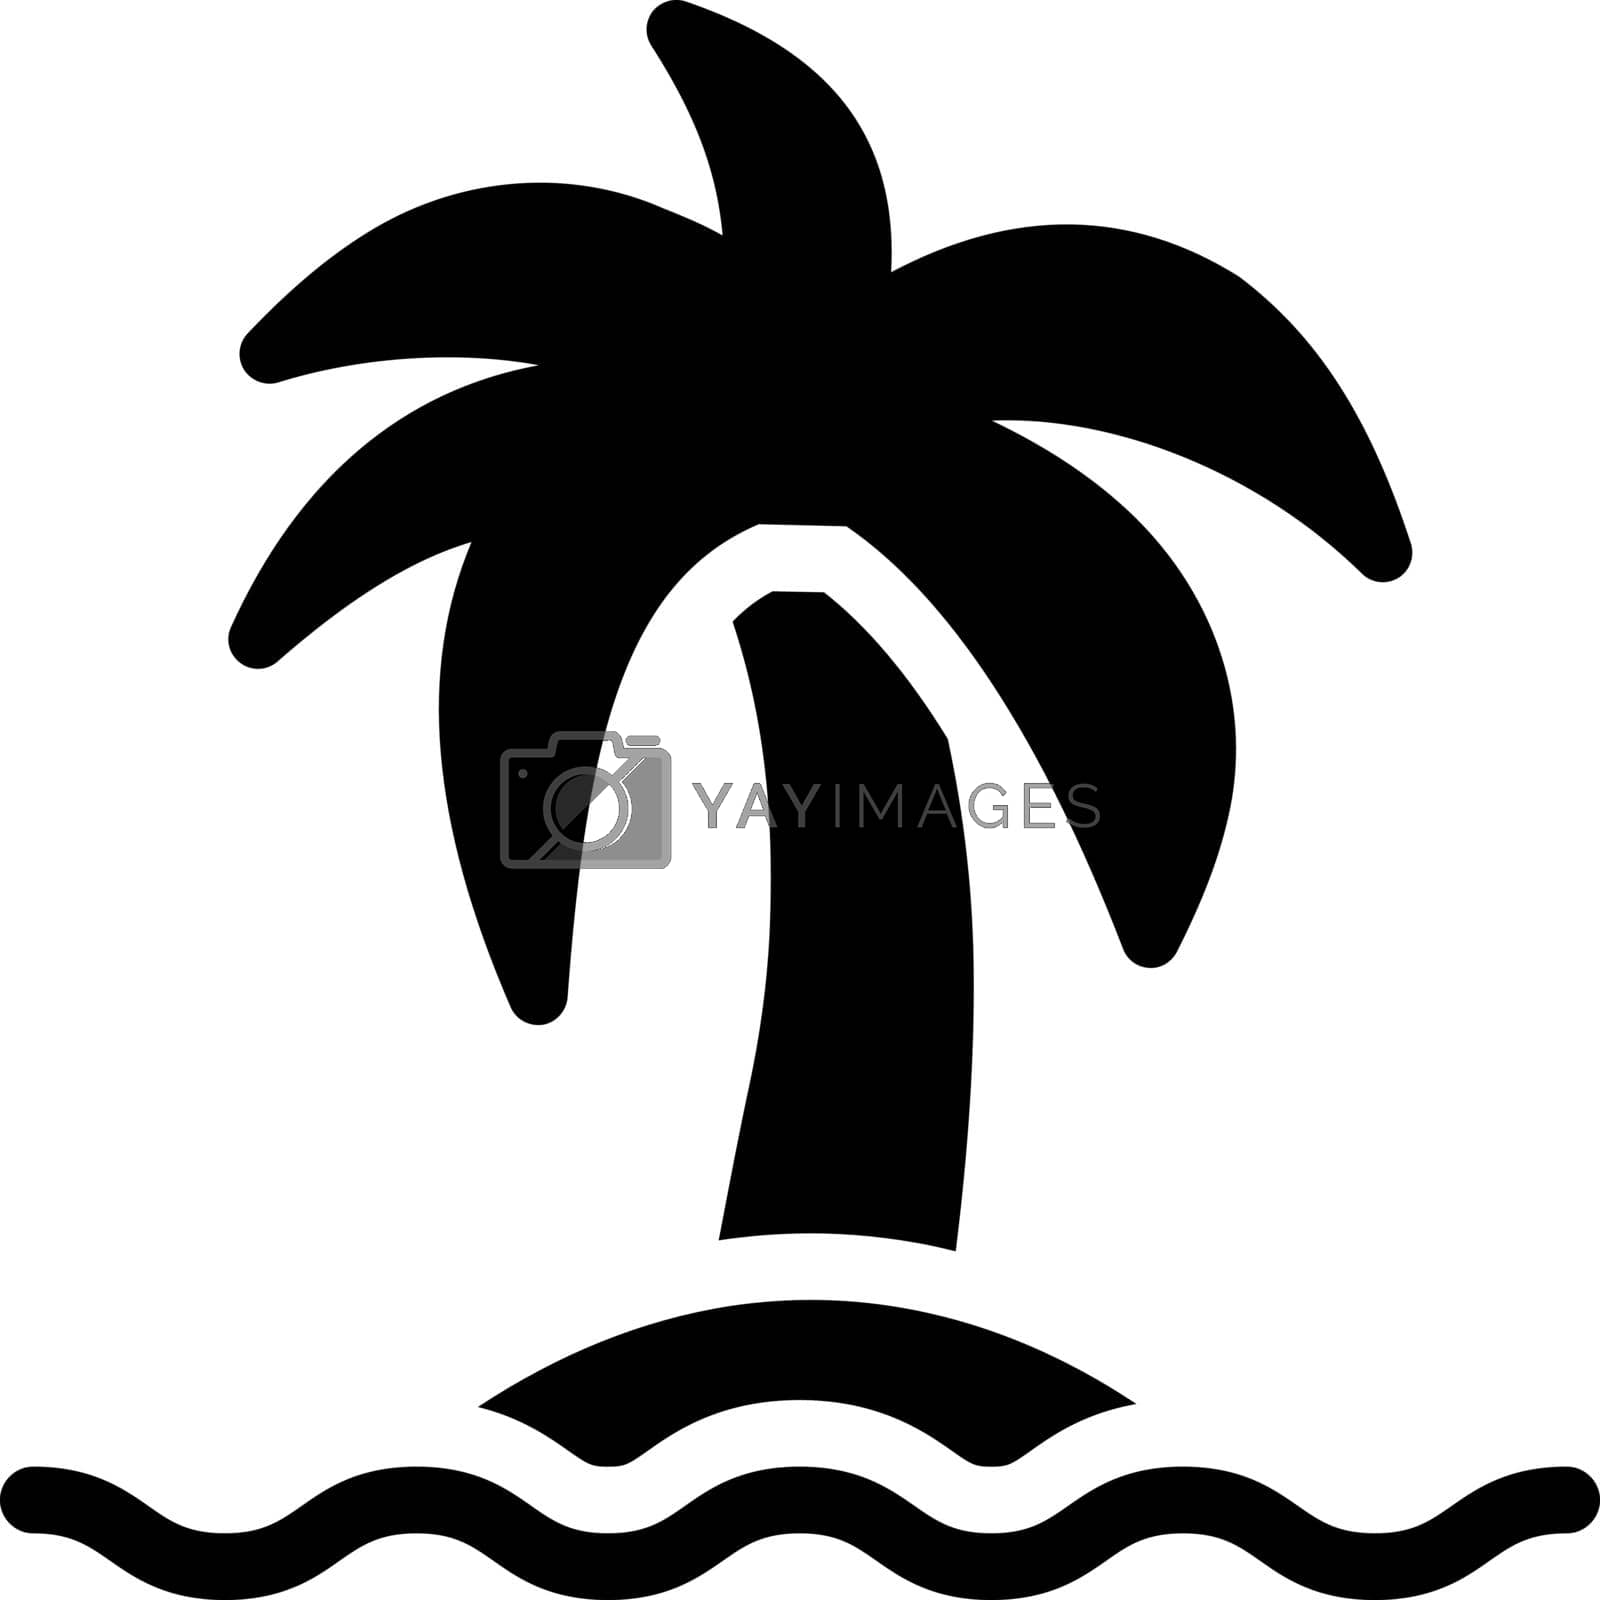 Royalty free image of palm tree by FlaticonsDesign